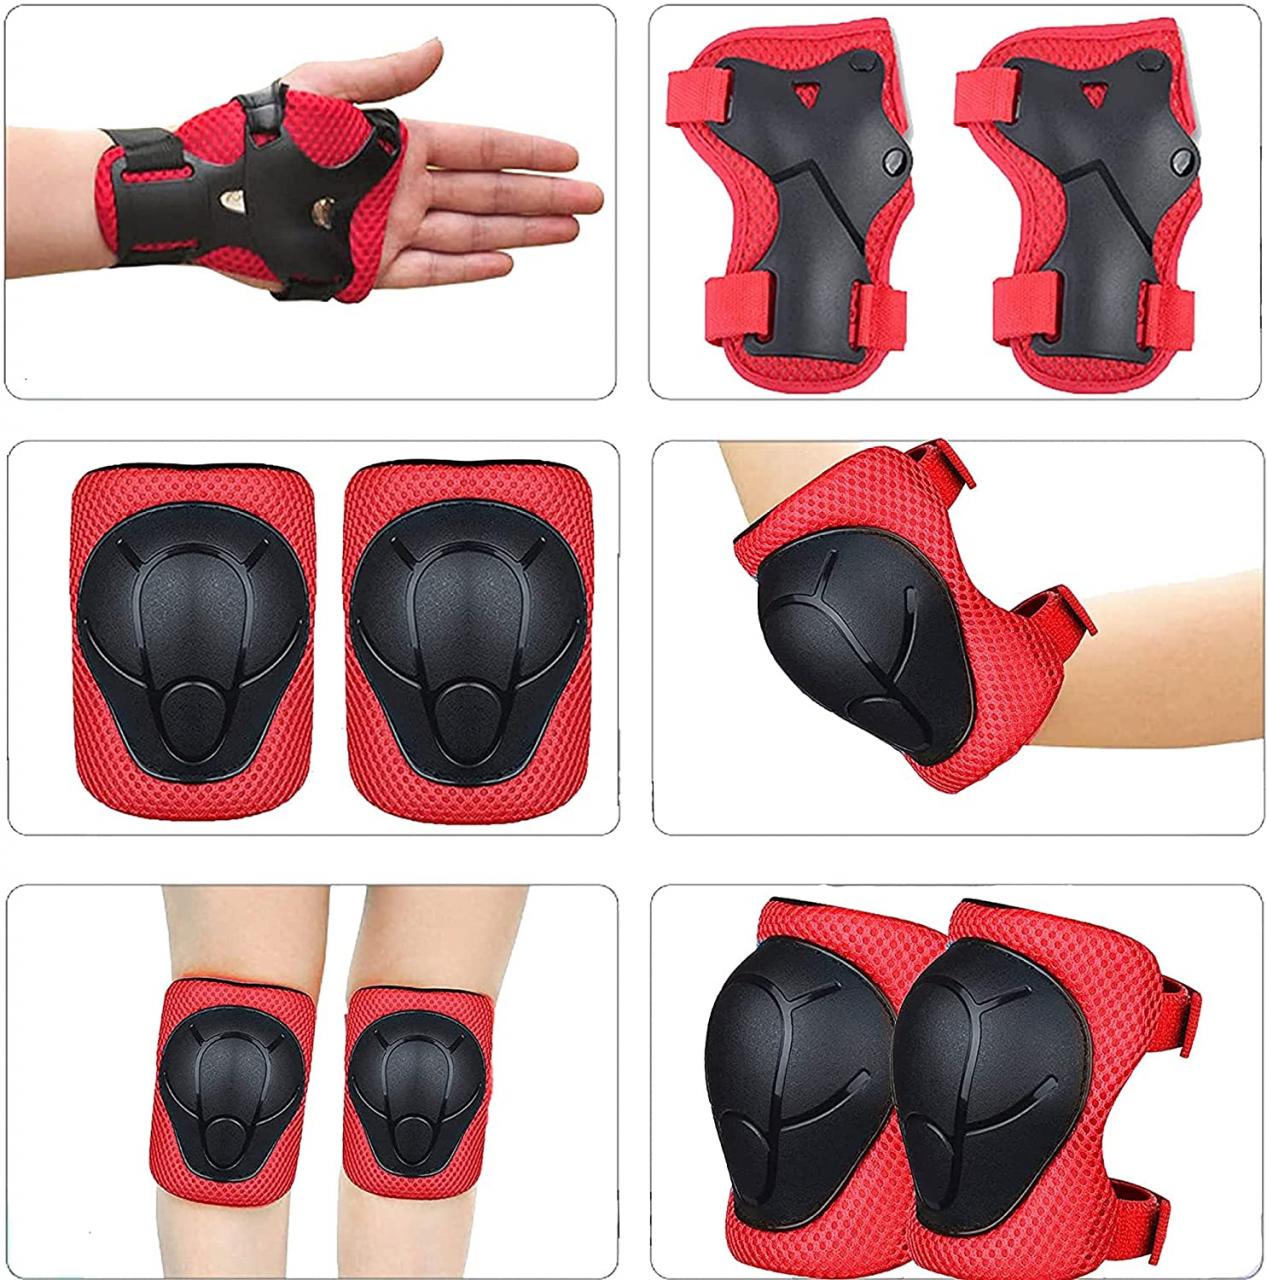 Buy Kids Kneepads and Elbow Pads Knee Pads for Kids Knee and Elbow Pads  Skateboard Knee Pads and Elbow Pads for Kids 3-10 Kids Knee Pads Set - 6  Pcs Bike Protective